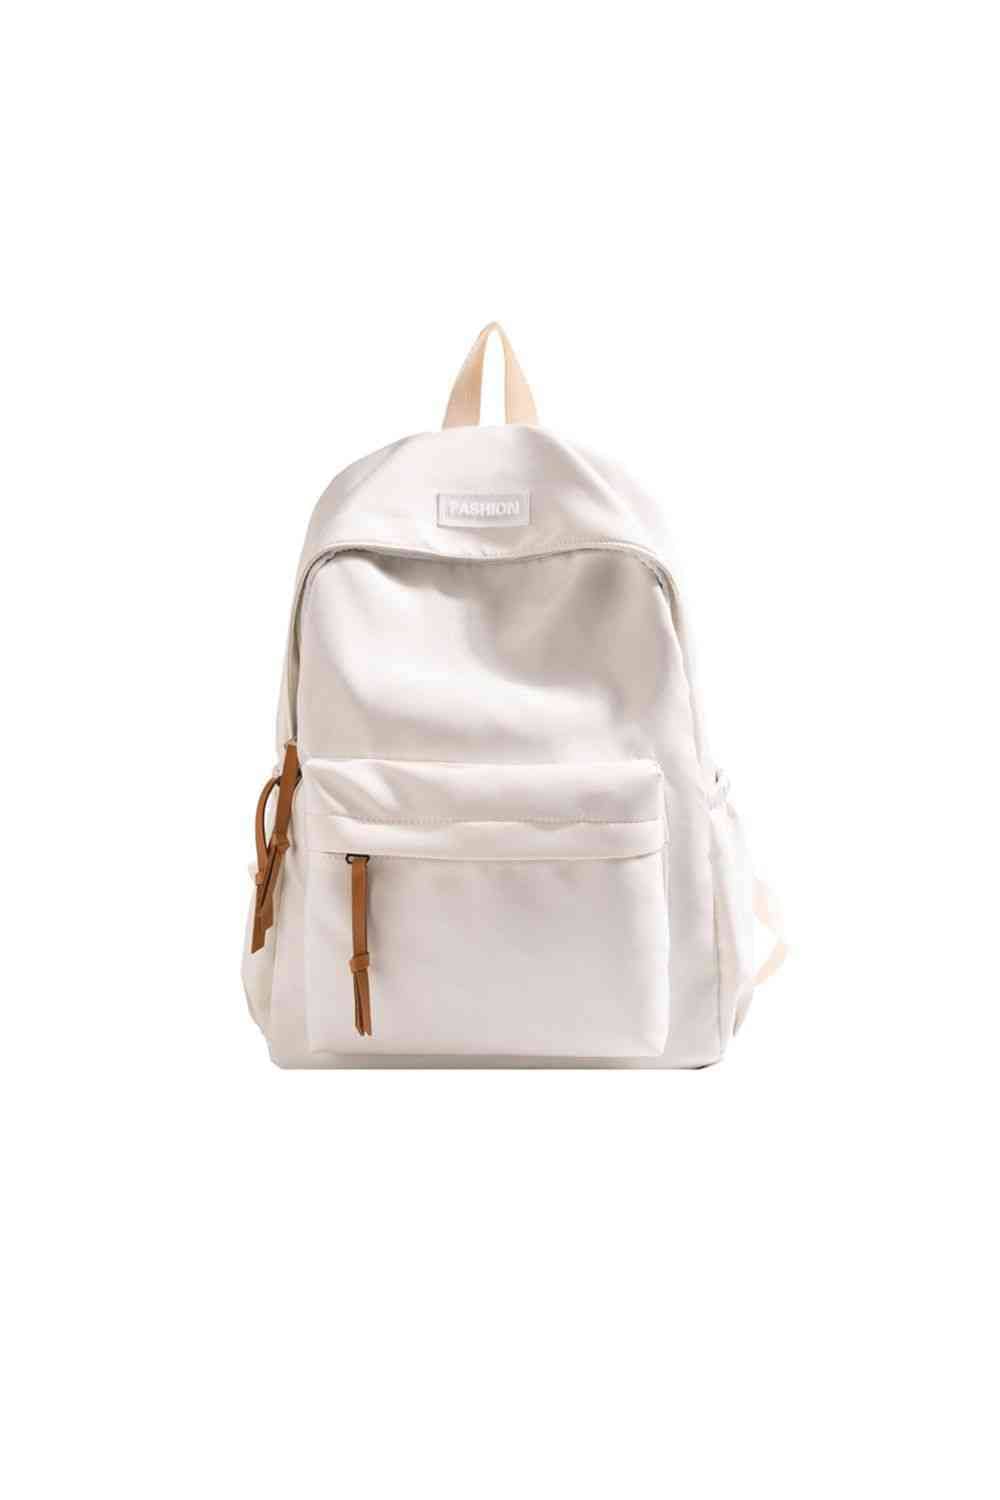 Adored Fashion Polyester Backpack White / One Size